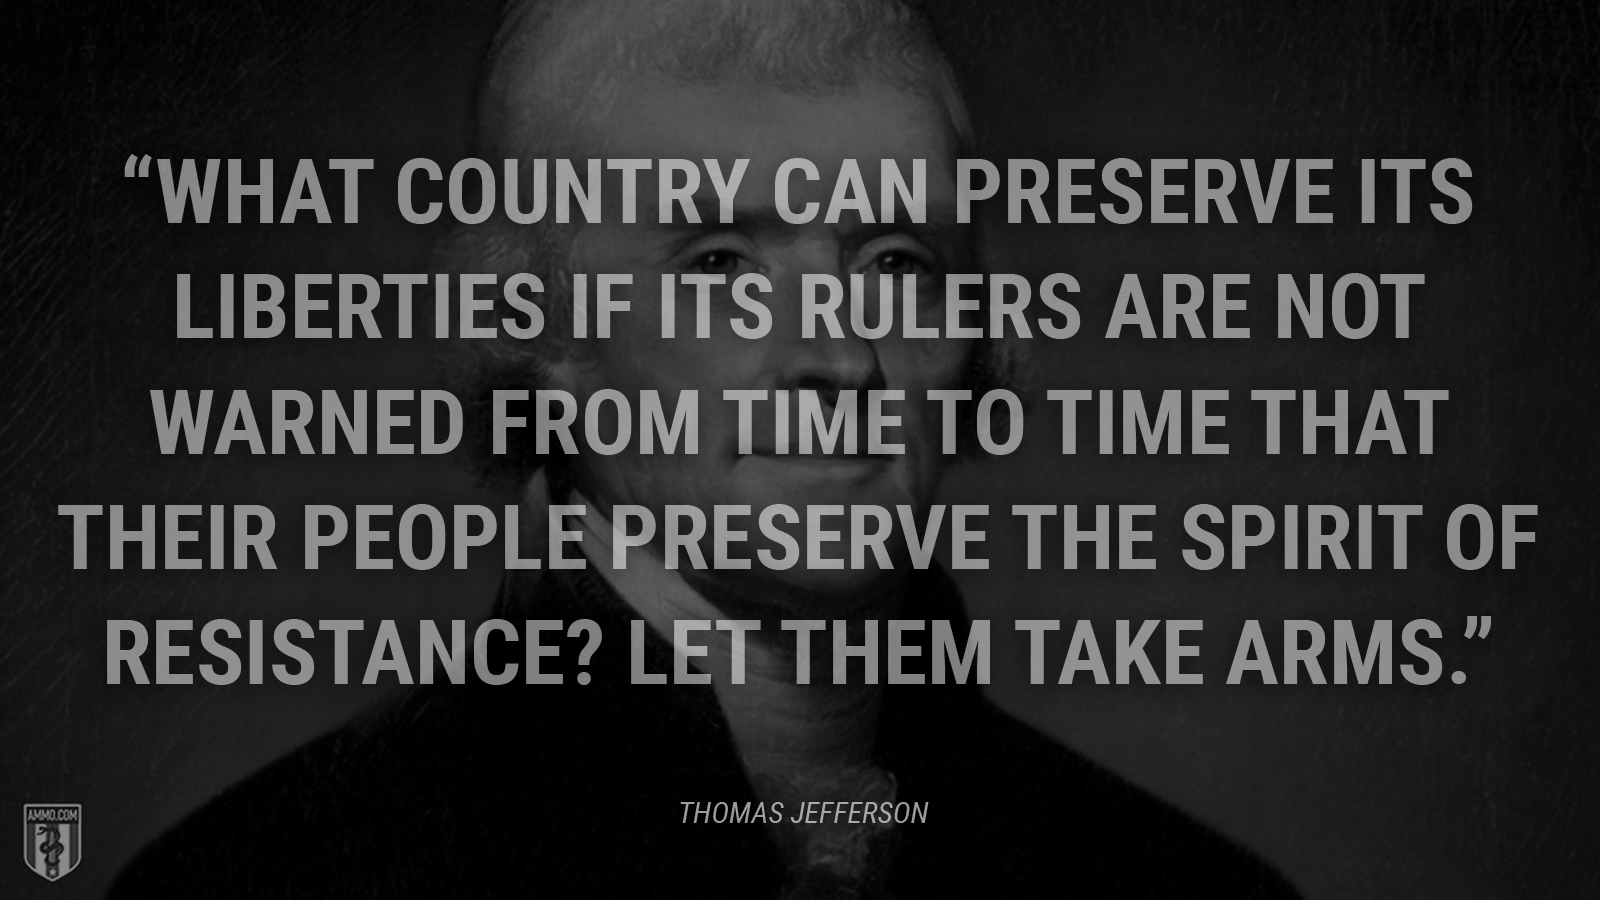 “What country can preserve its liberties if its rulers are not warned from time to time that their people preserve the spirit of resistance? Let them take arms.” - Thomas Jefferson